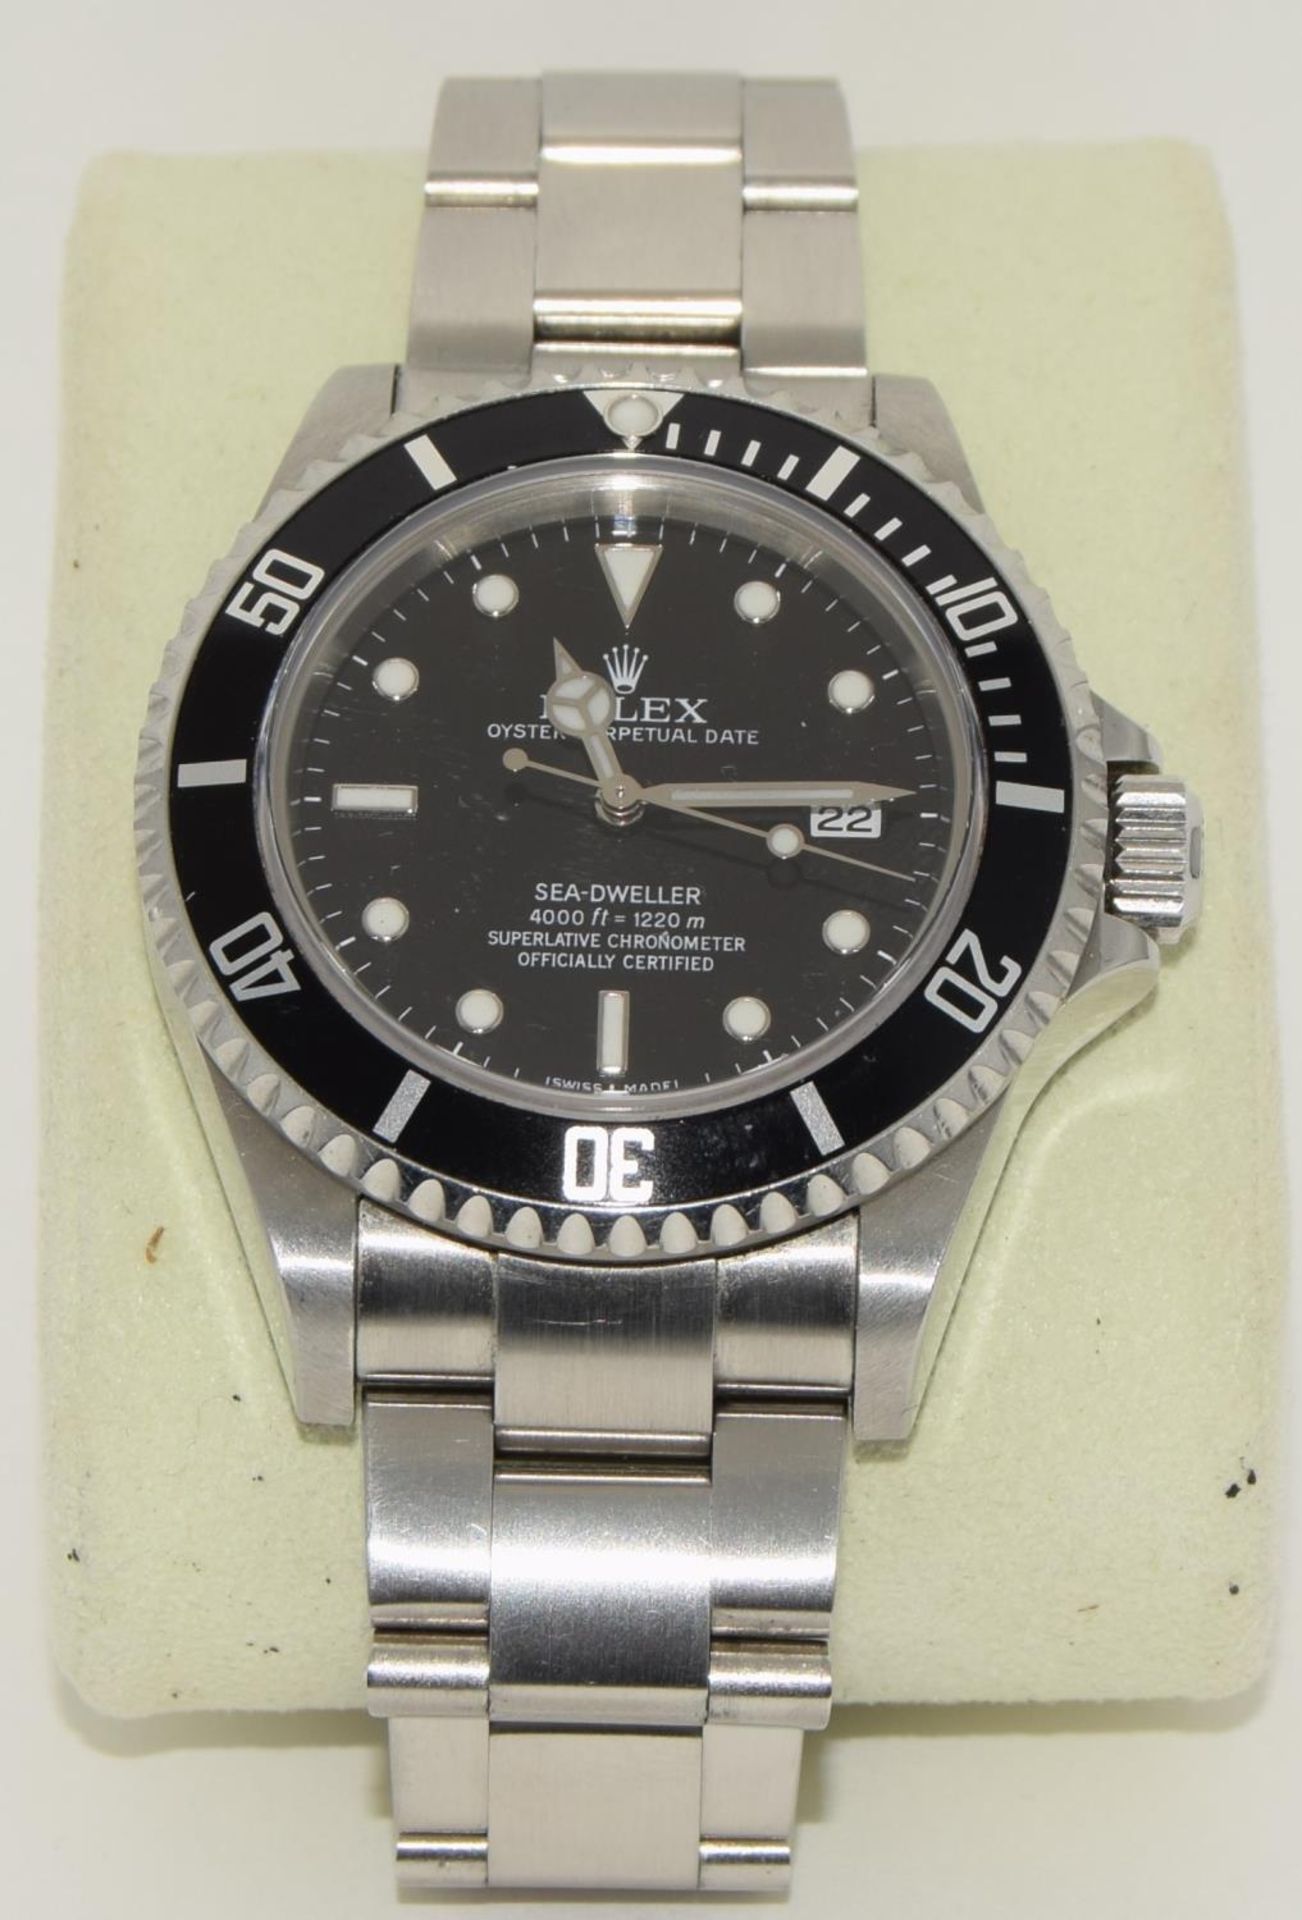 Rolex Sea Dweller mopd-16600, 2006, boxed and papers. (ref 8) - Image 6 of 7